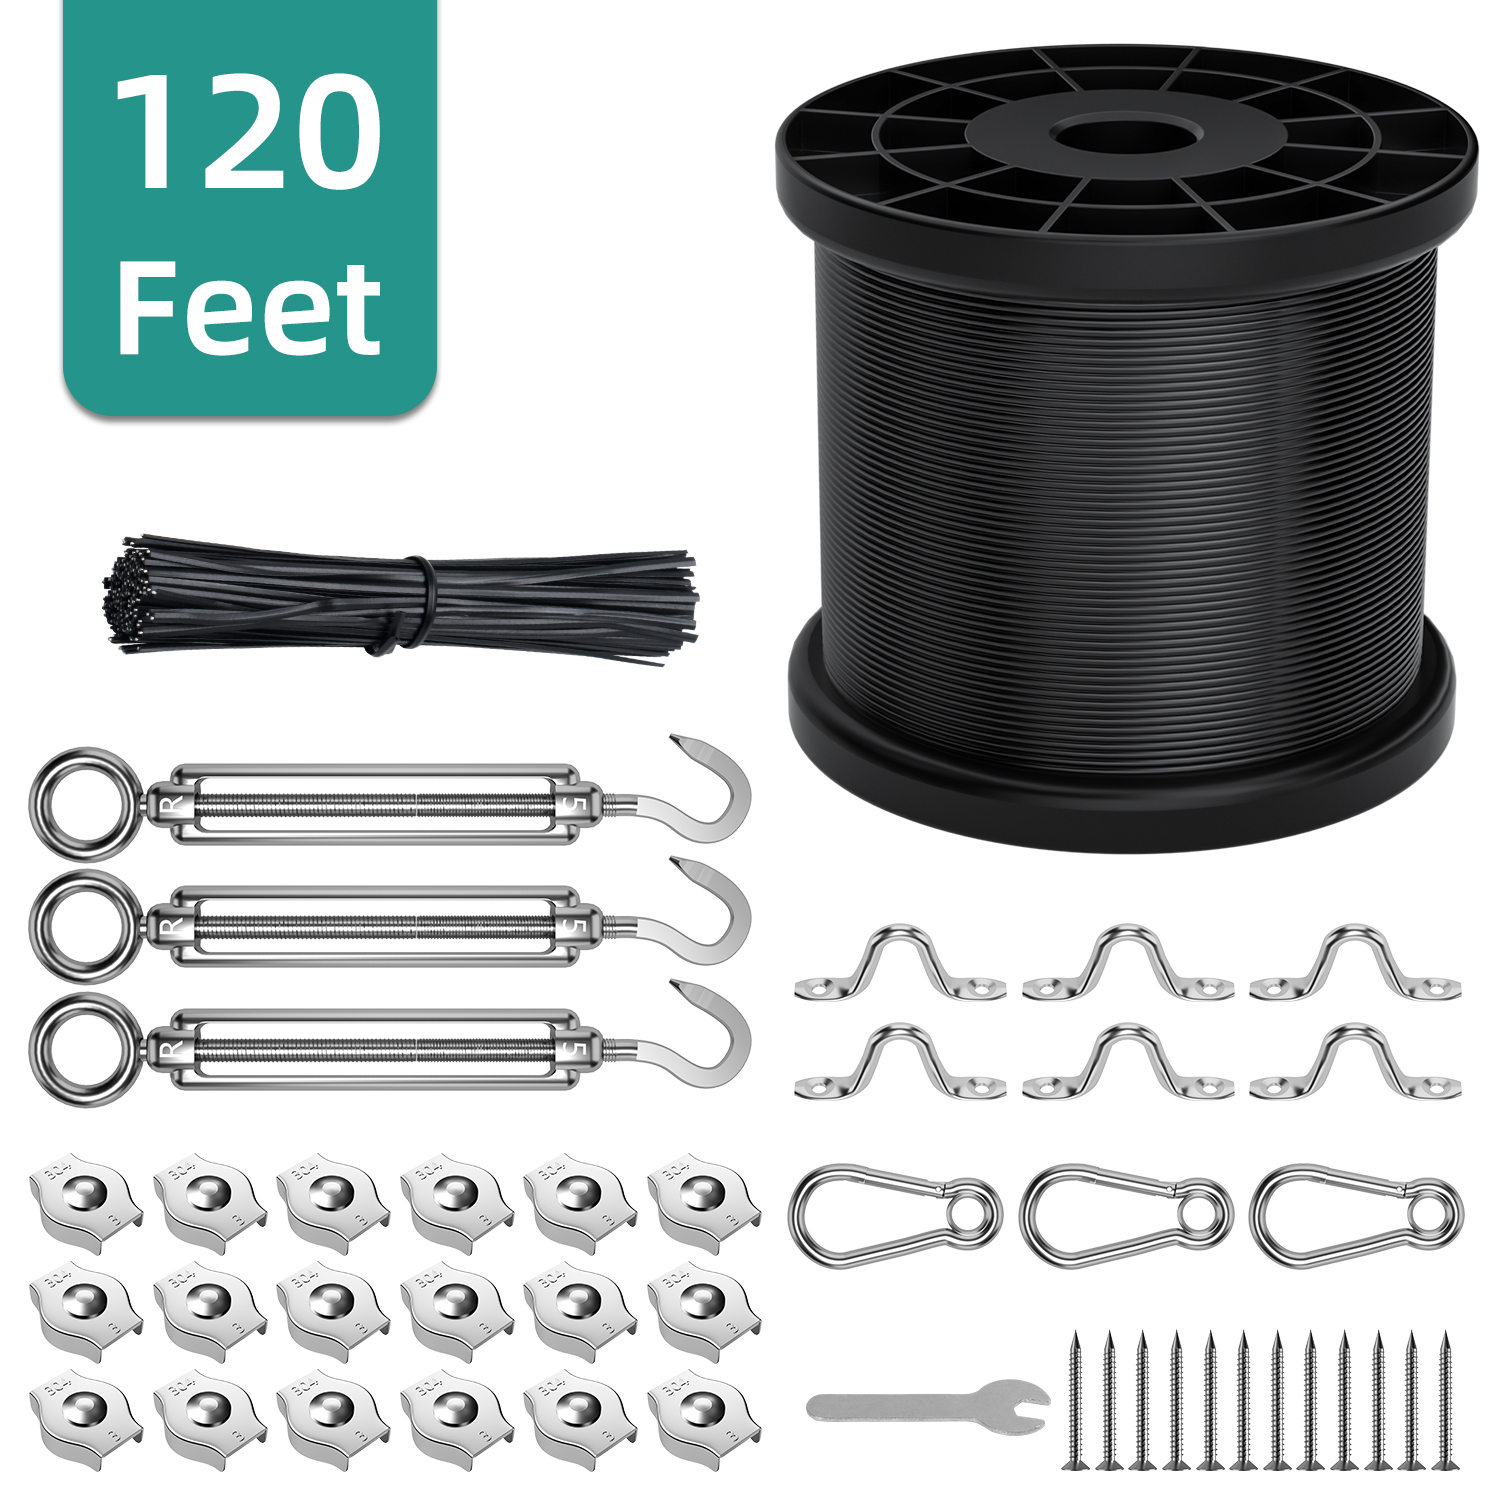 Fil-fresh String Light Hanging Kit, 304 Stainless Steel Cable for Outdoor Lights, 120ft Guide Wire Kit Include Turnbuckles, Hooks, Clamp, and Screws